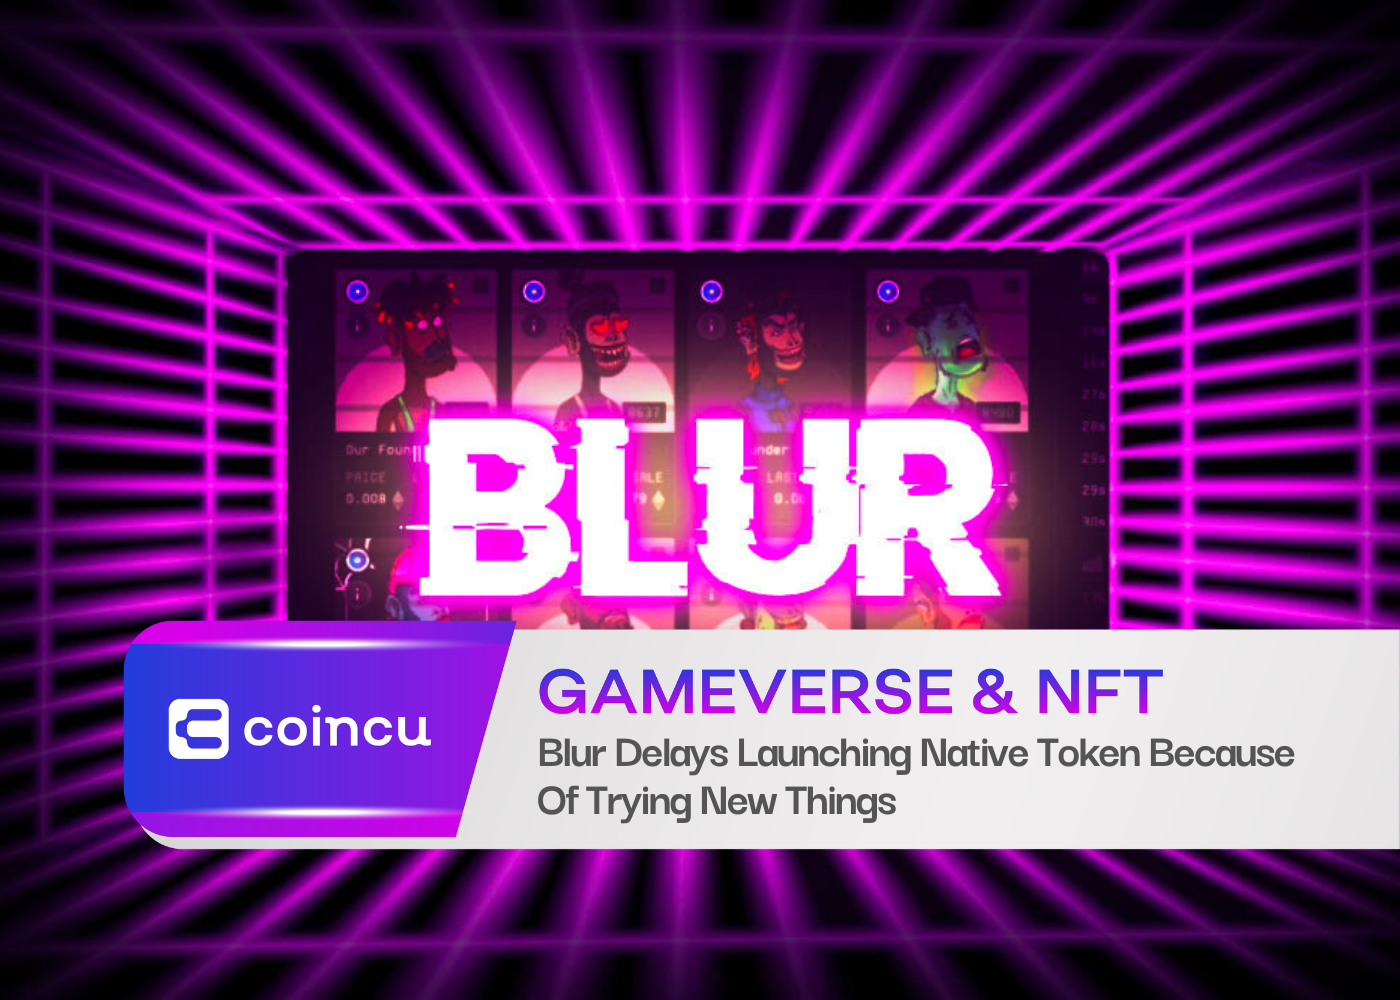 Blur Delays Launching Native Token Because Of Trying New Things